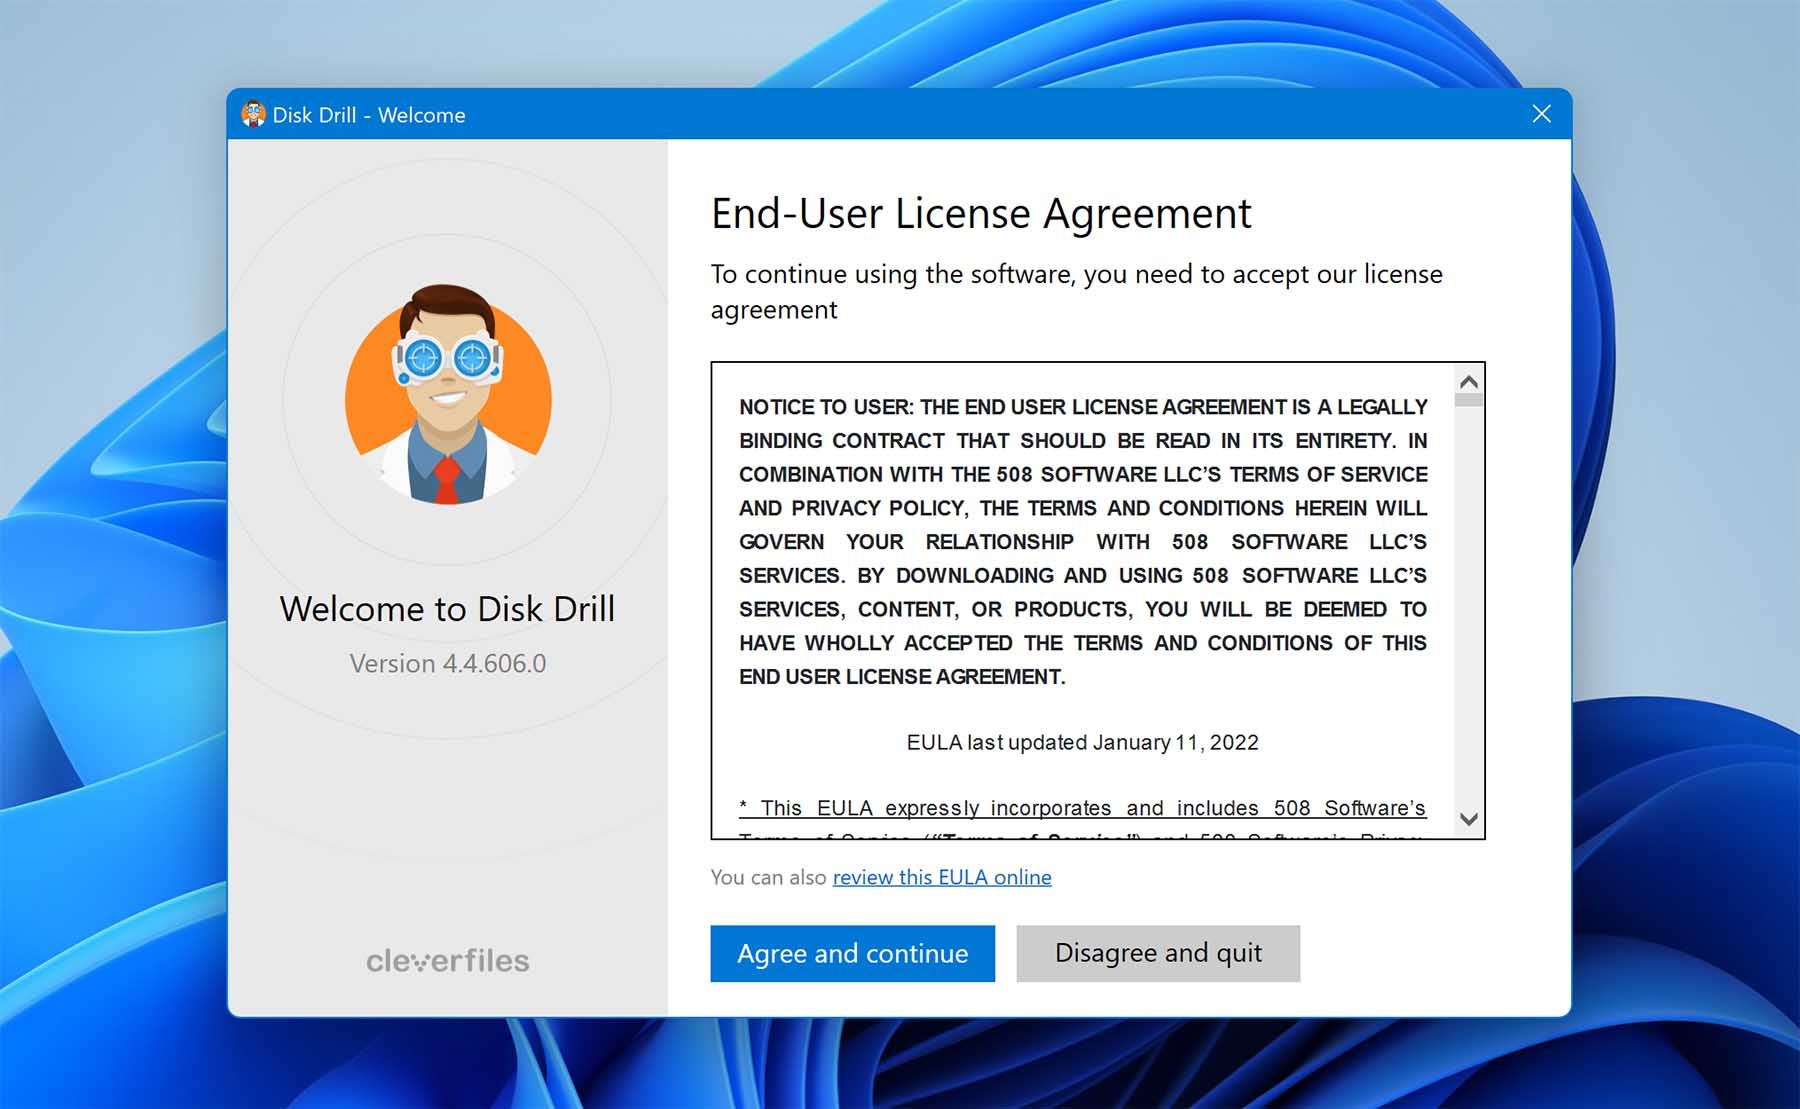 Accept the license agreement to proceed further